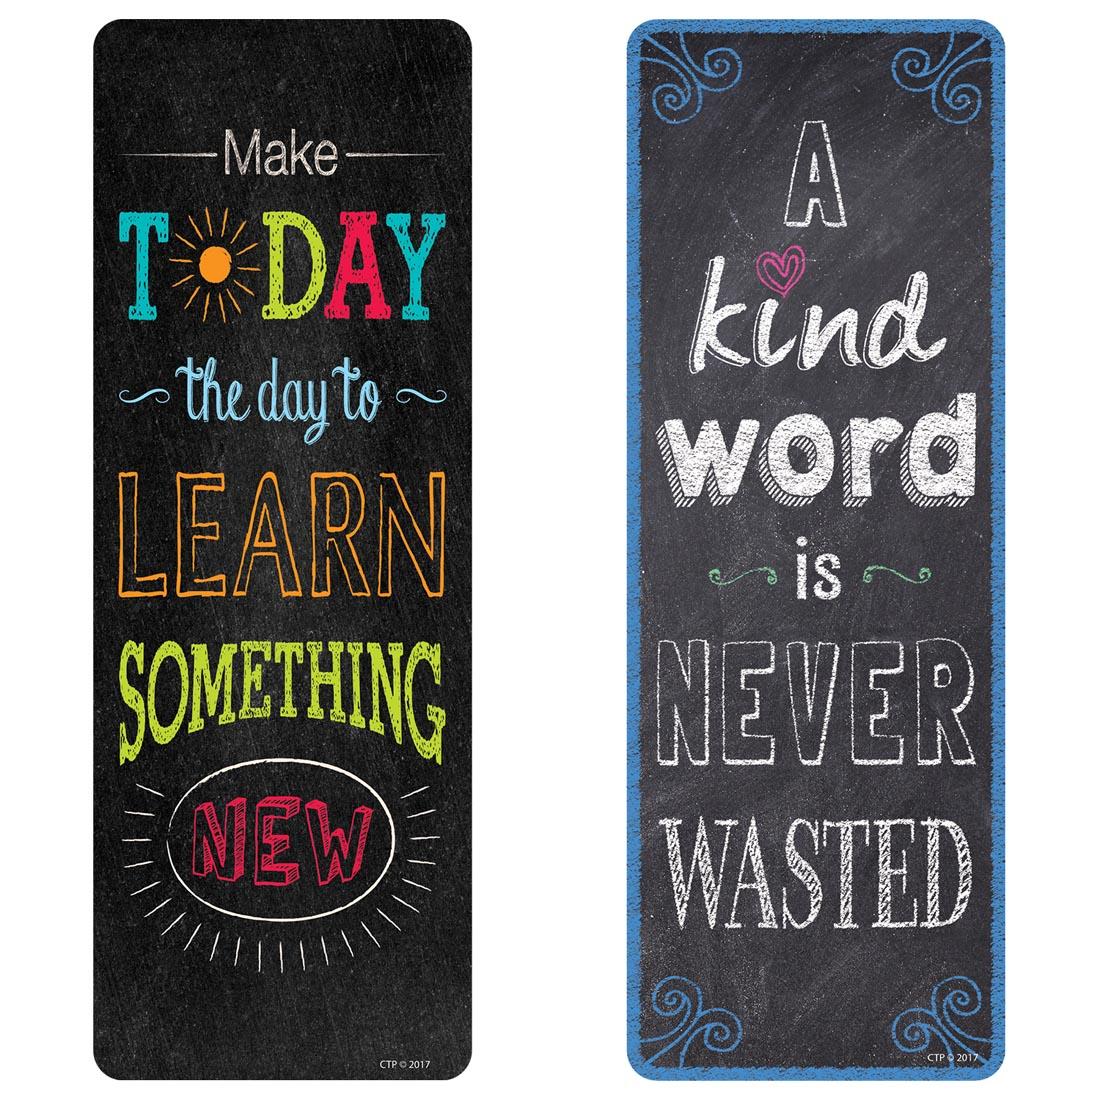 Motivational Quotes Bookmarks include Make Today the Day to Learn Something New and A kind Word is Never Wasted